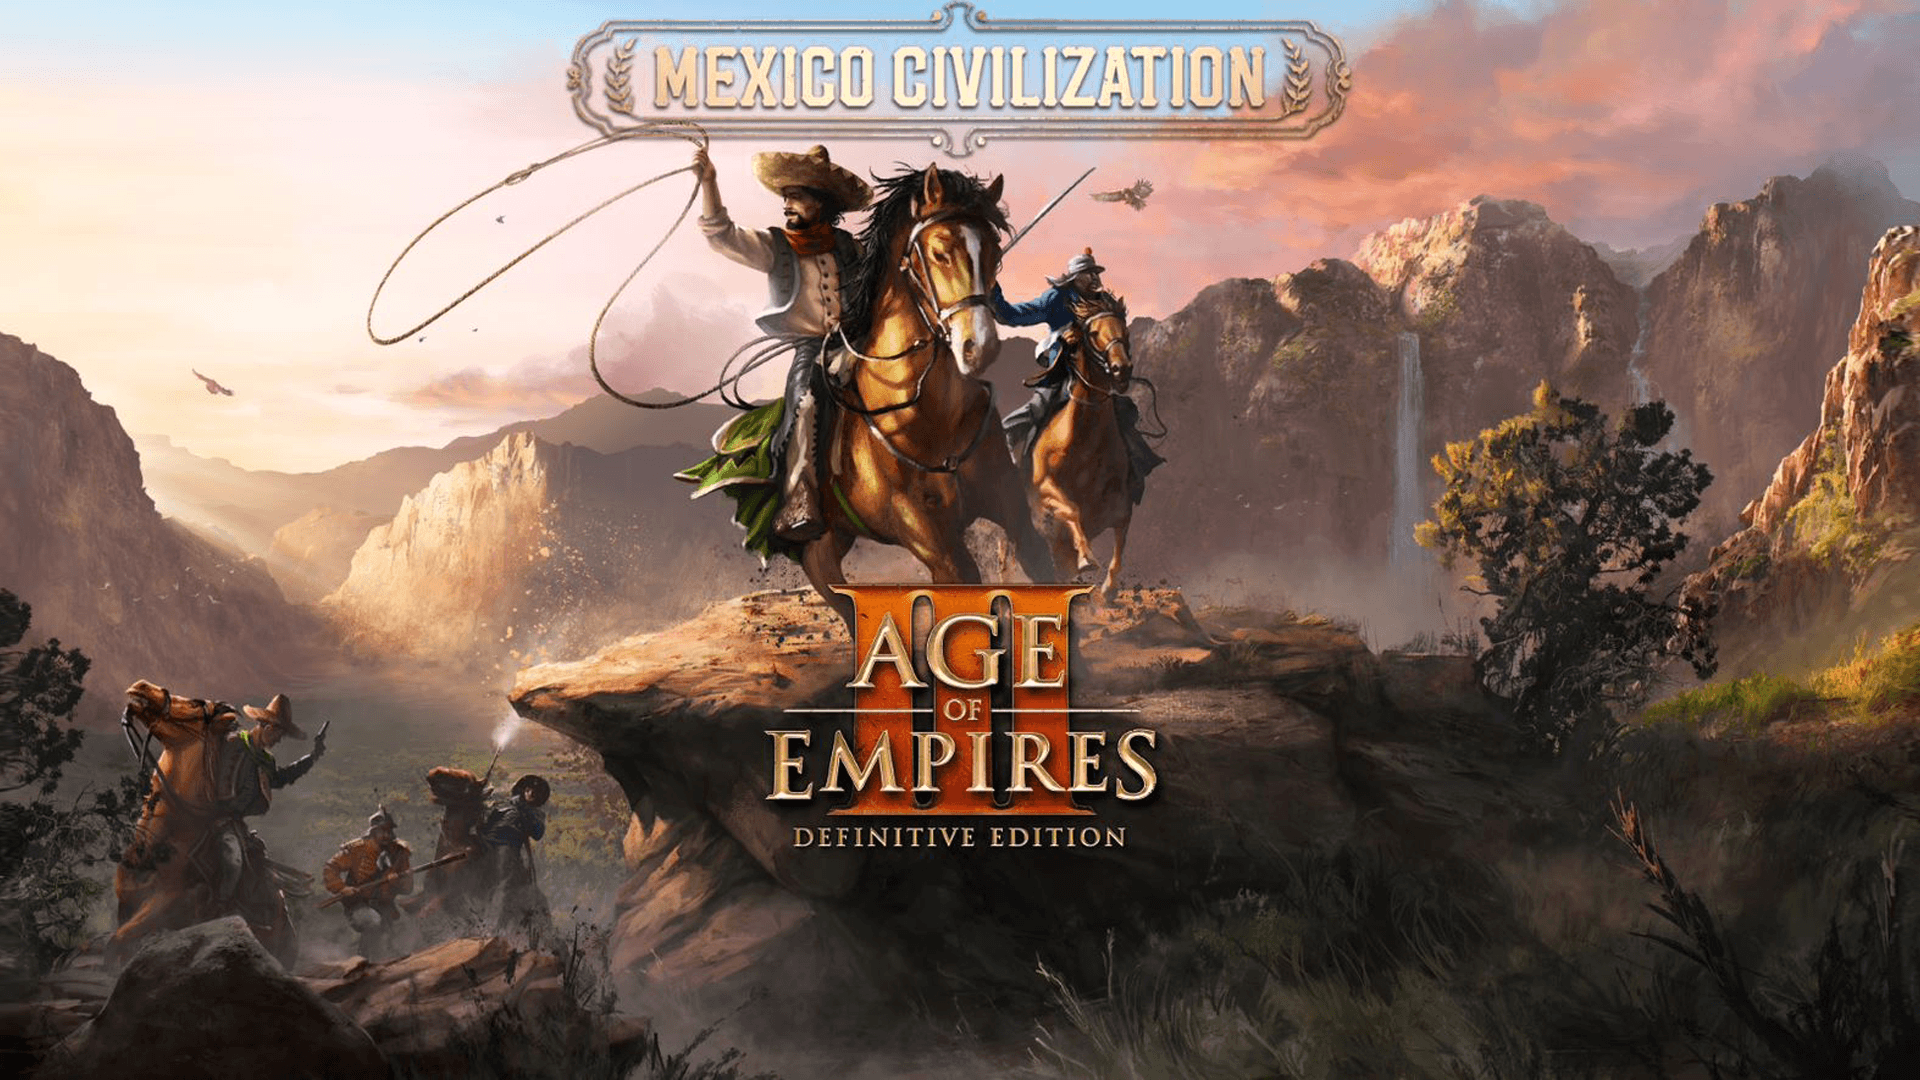 Two mounted Mexican cuatreros sit proudly at the edge of a cliff, as an army approaches from the valley below, highlighting the Mexico Civilization with an Age of Empires 3 logo overtop.